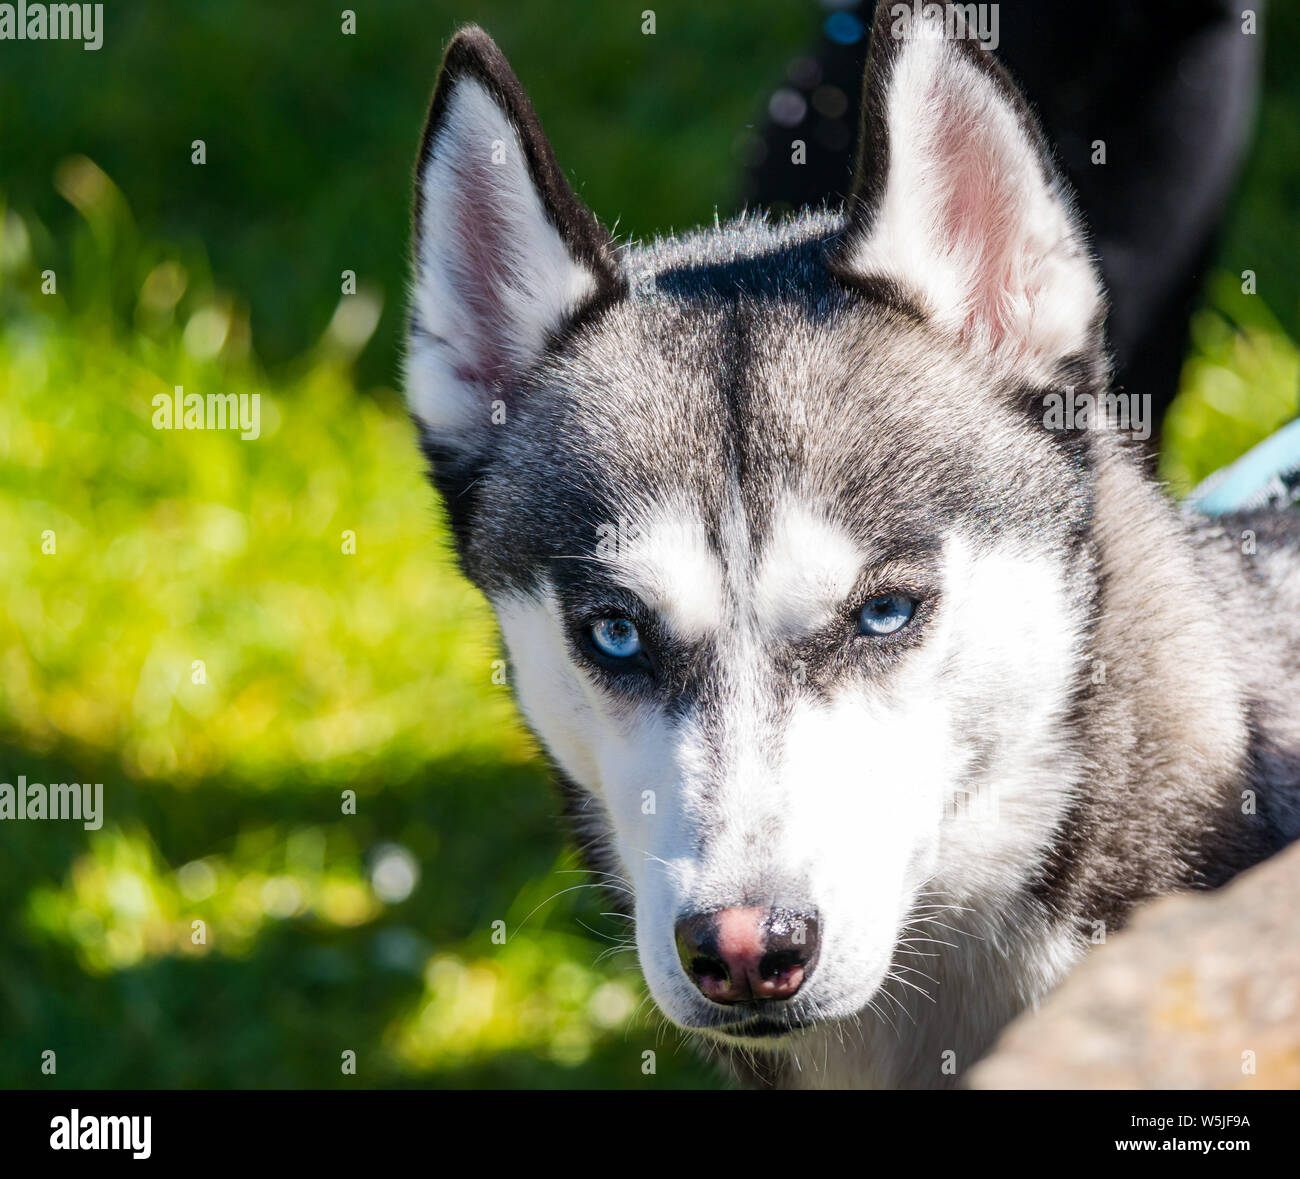 Watchful menacing look from Siberian Husky dog with bright blue eyes and pricked alert ears Stock Photo